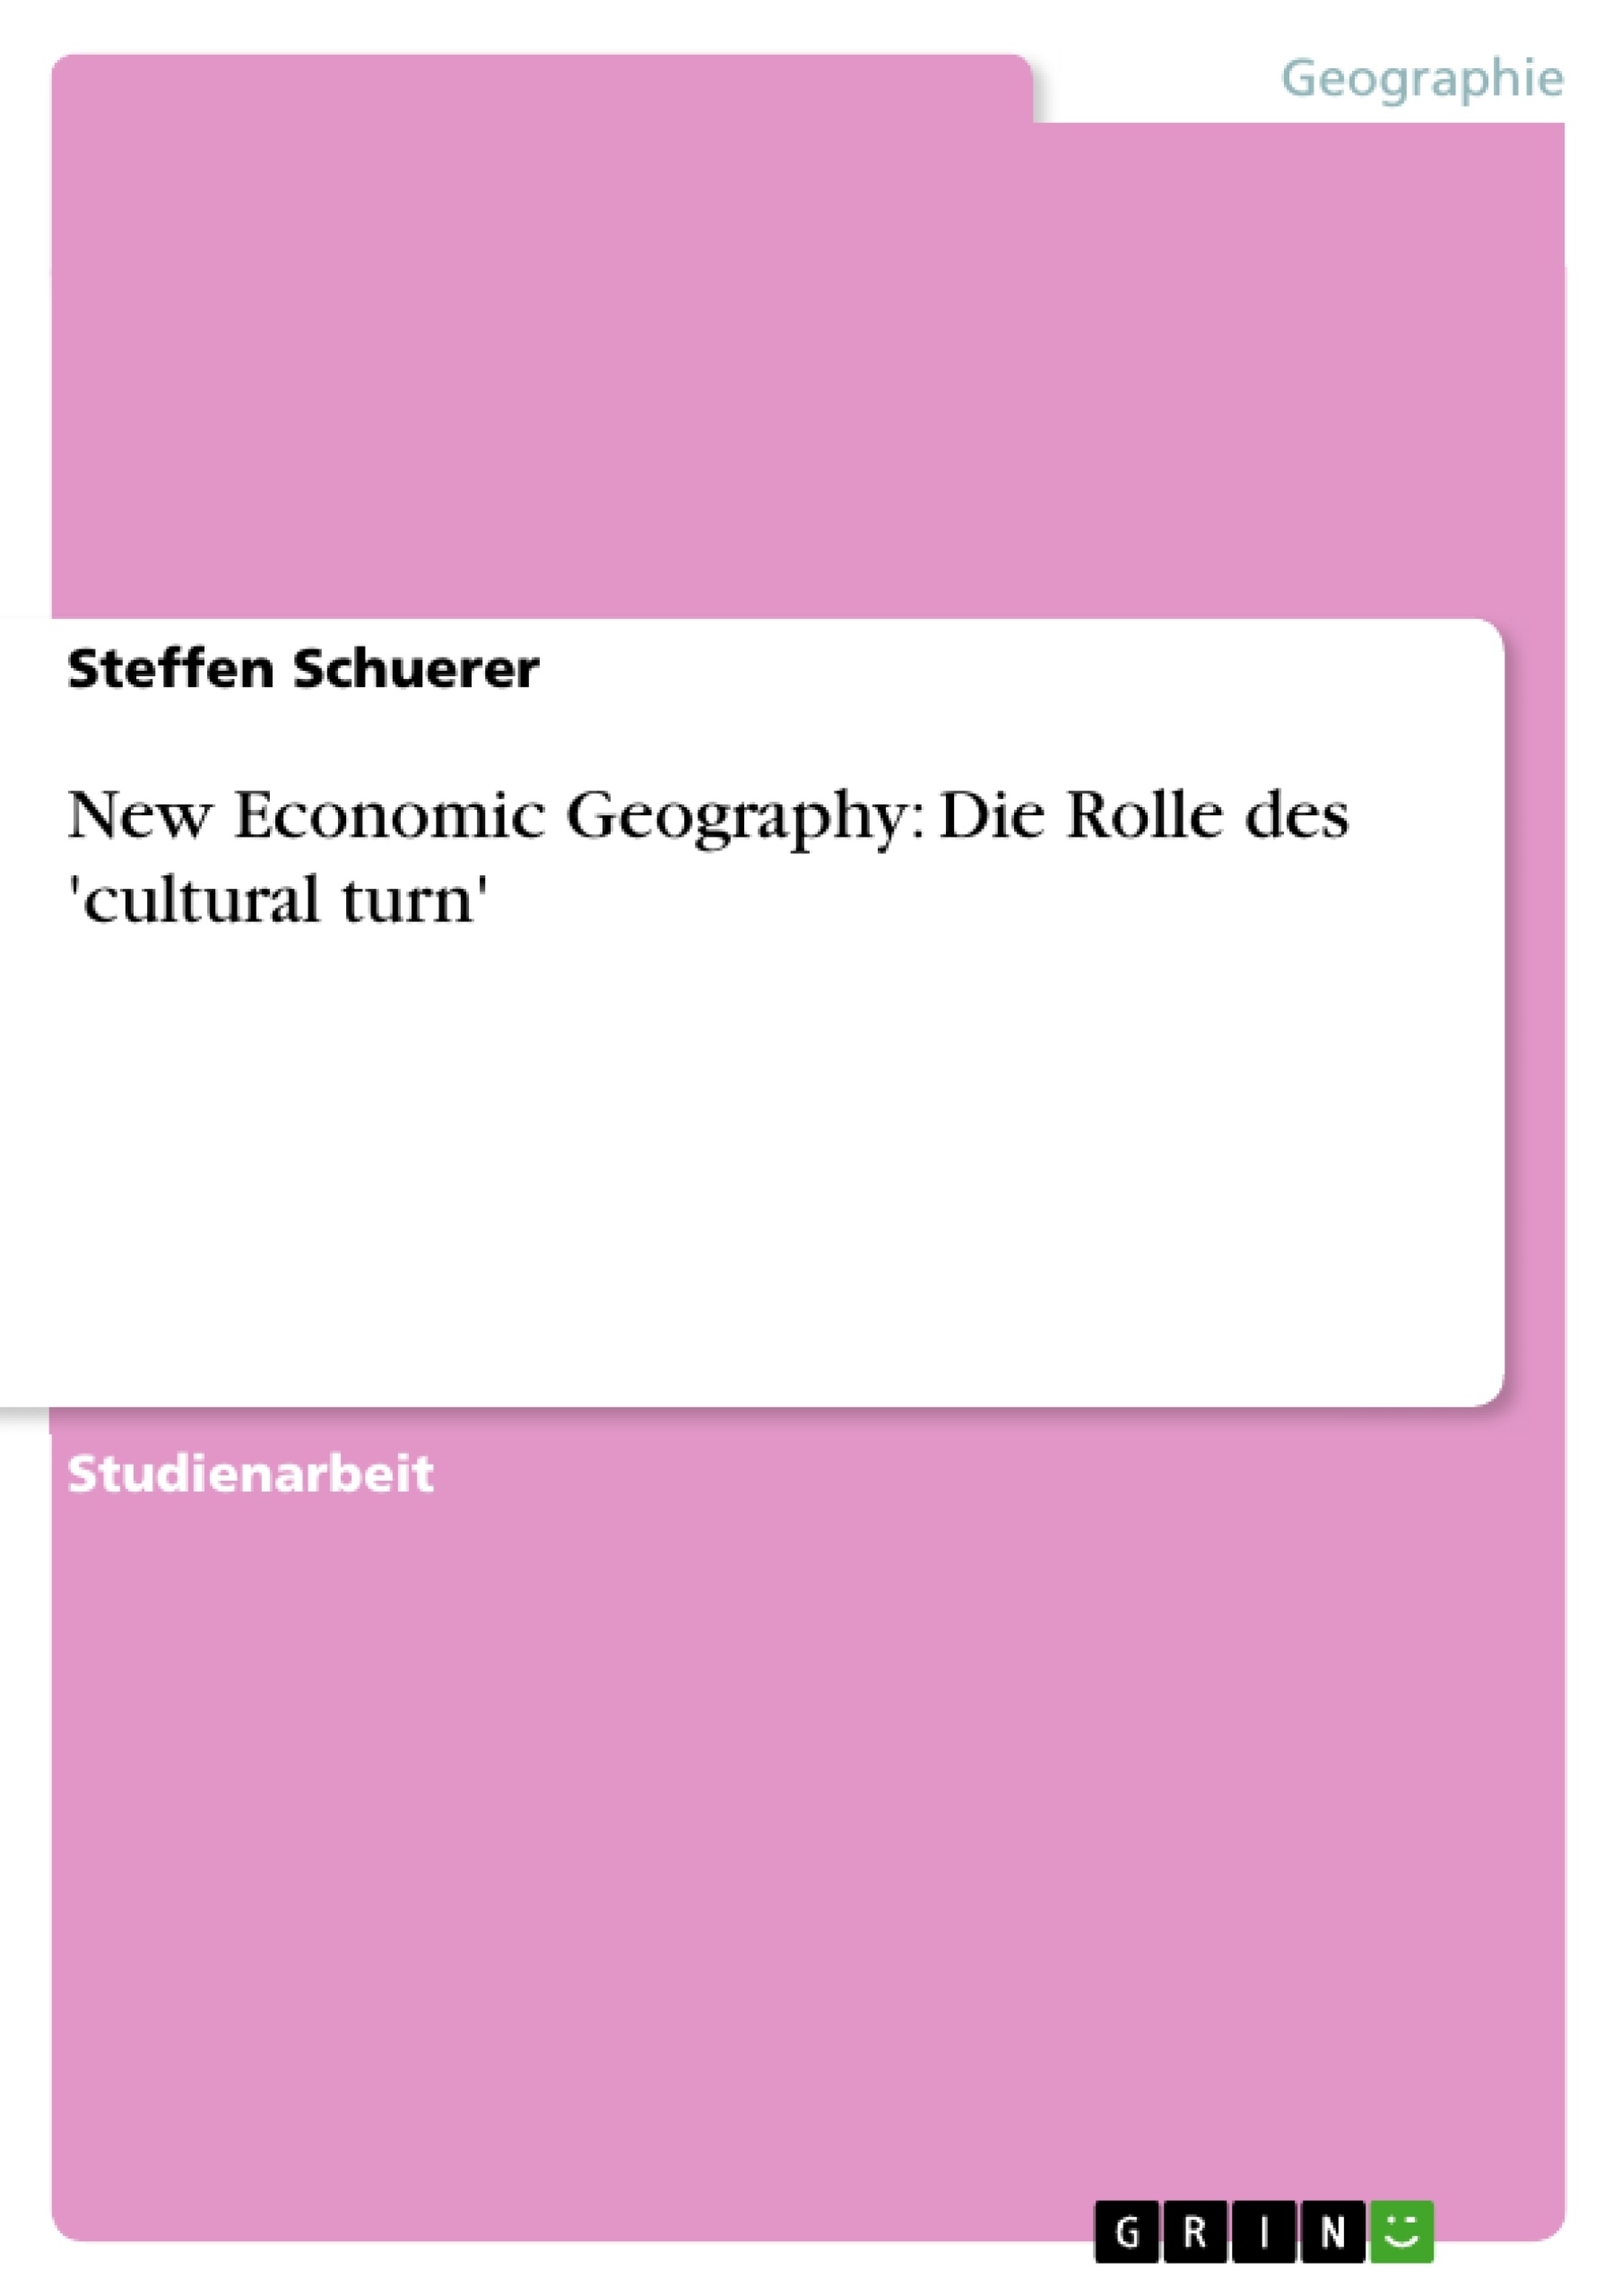 Titre: New Economic Geography: Die Rolle des 'cultural turn'